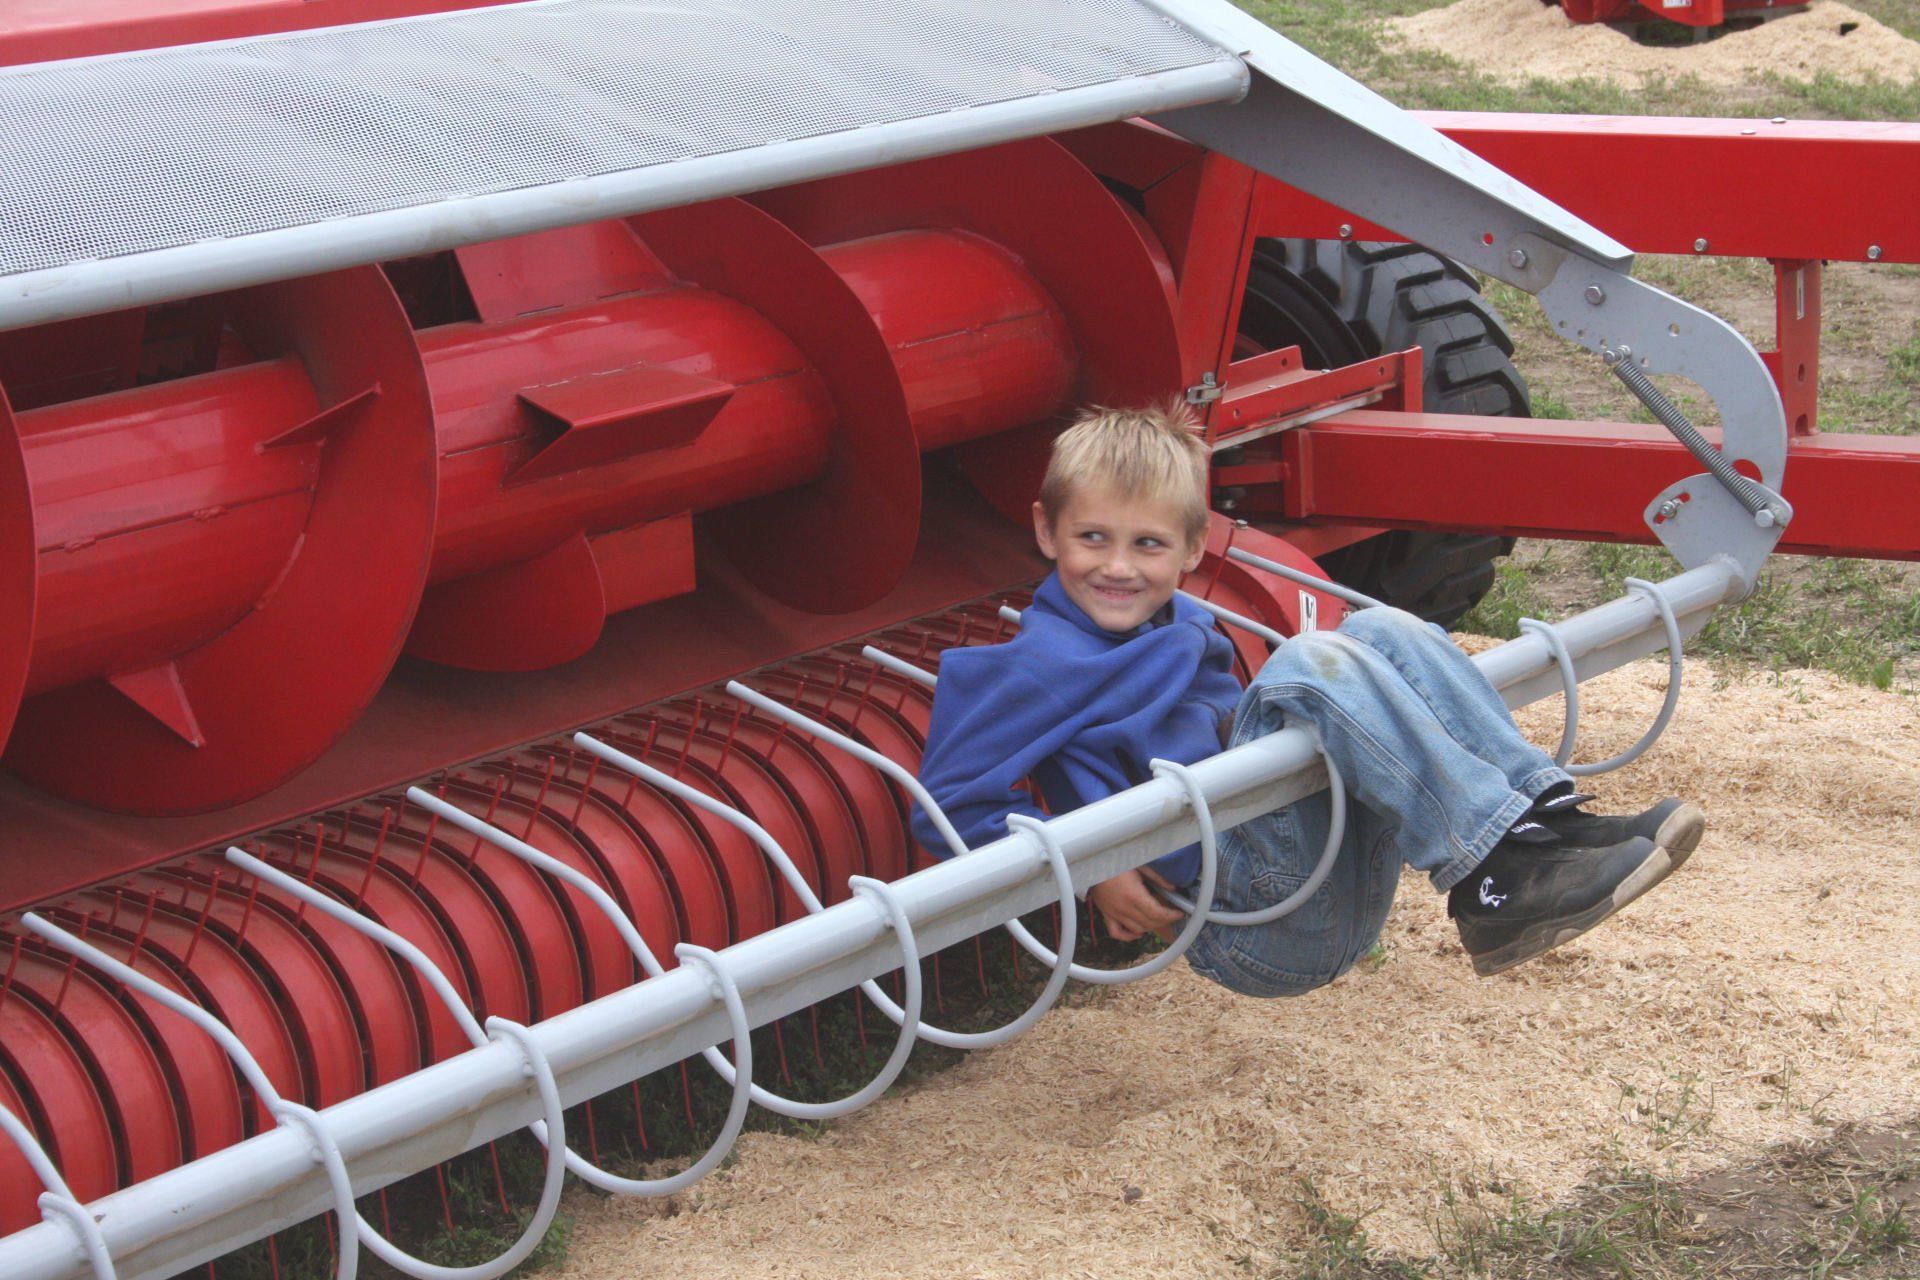 Wisconsin Farm Technology Days / WFTD / Start Planning Your Visit Now!